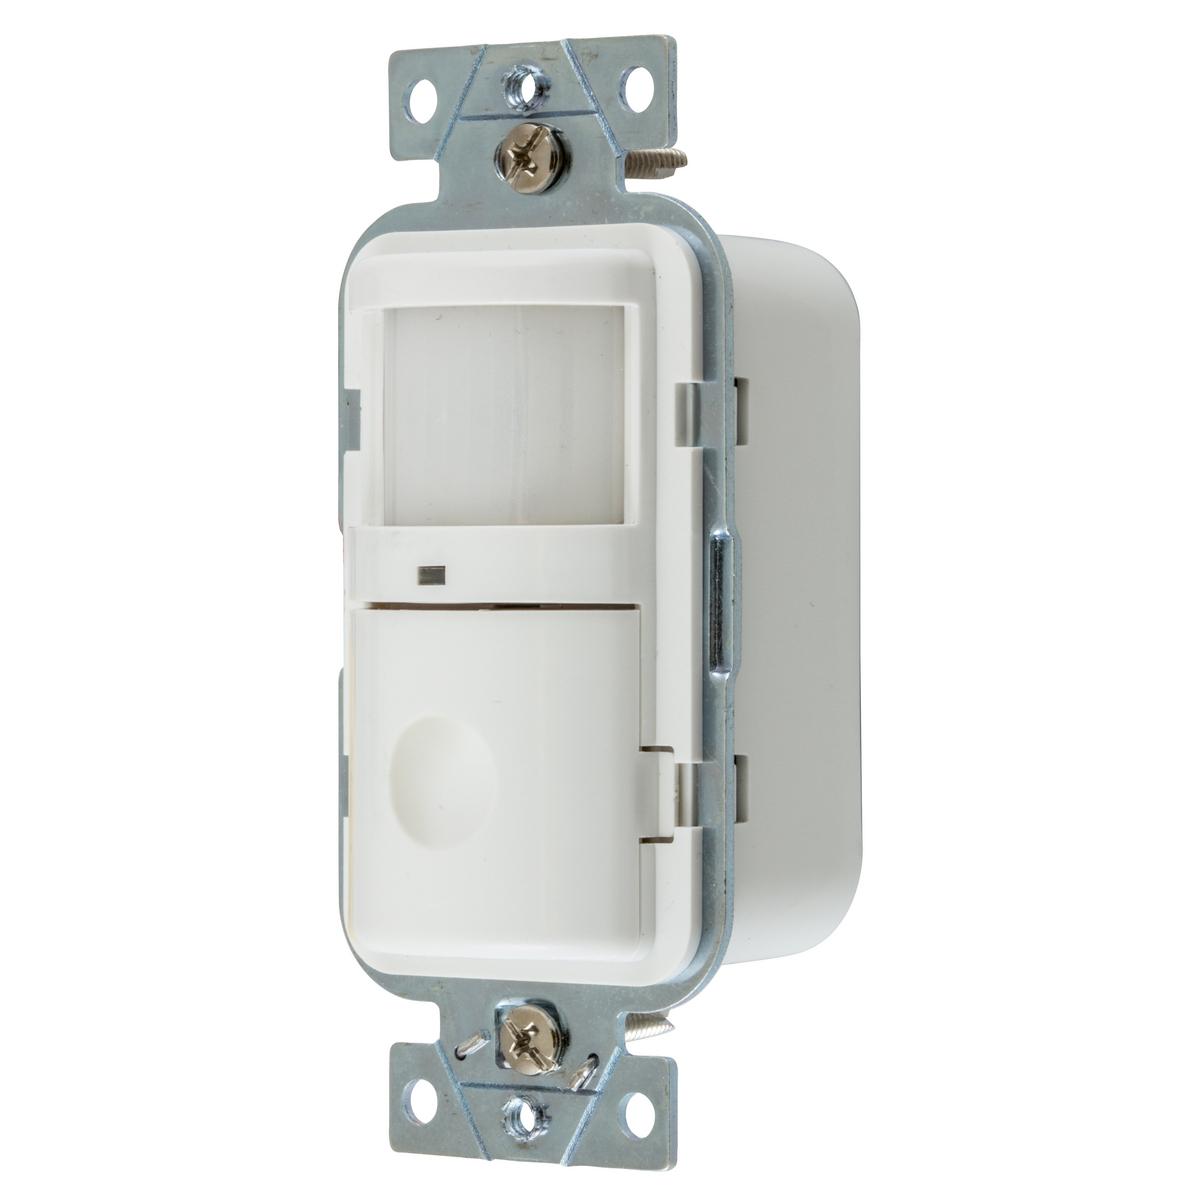 Hubbell WS1000W Lighting Controls, Vacancy/Occupancy Sensors, Wall Switch, Passive Infrared Technology, Single Circuit, 120V AC, 500 Watt, White  ; No Neutral ; 